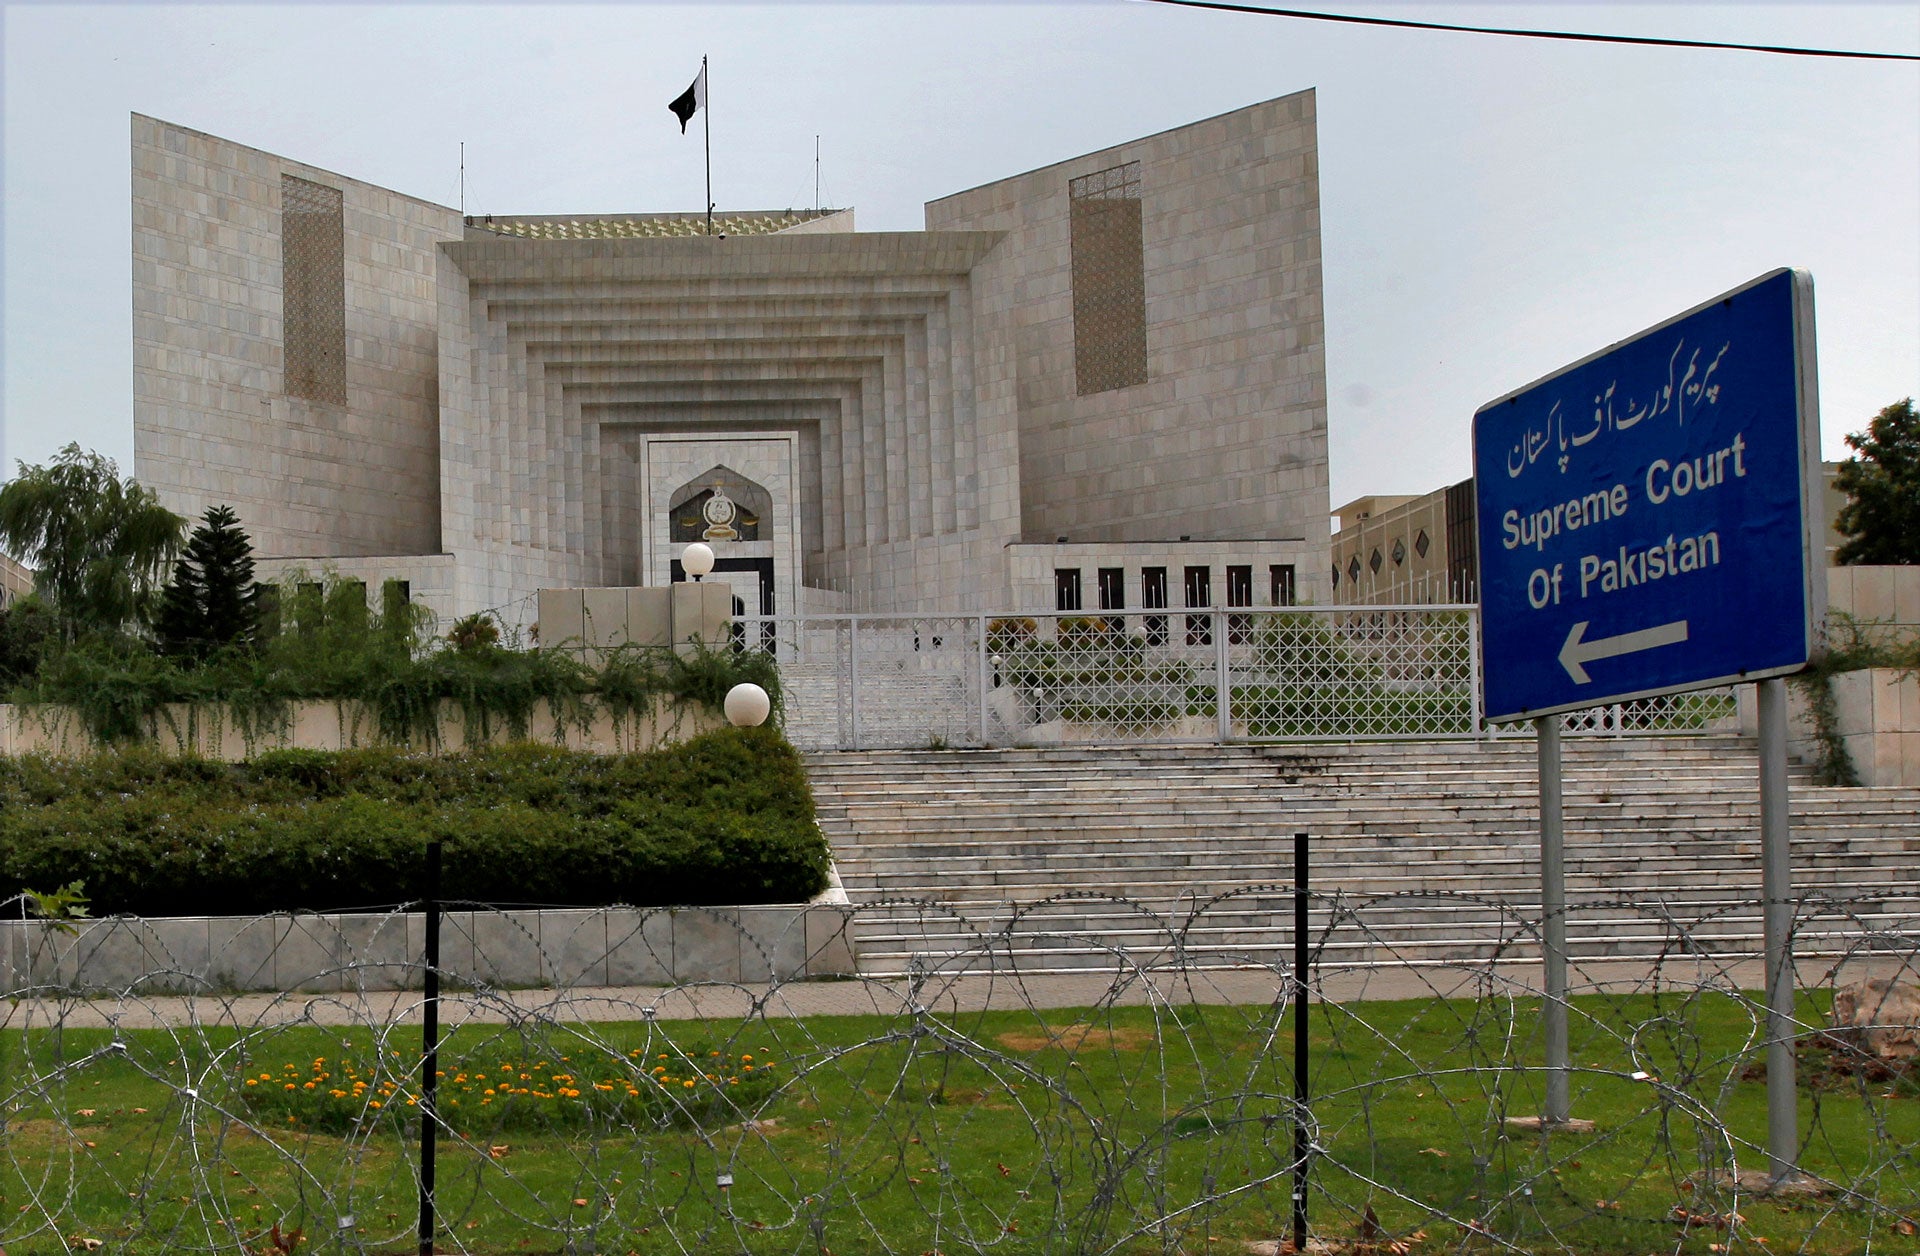 The Supreme court building is seen in Islamabad, Pakistan, July 17, 2017.